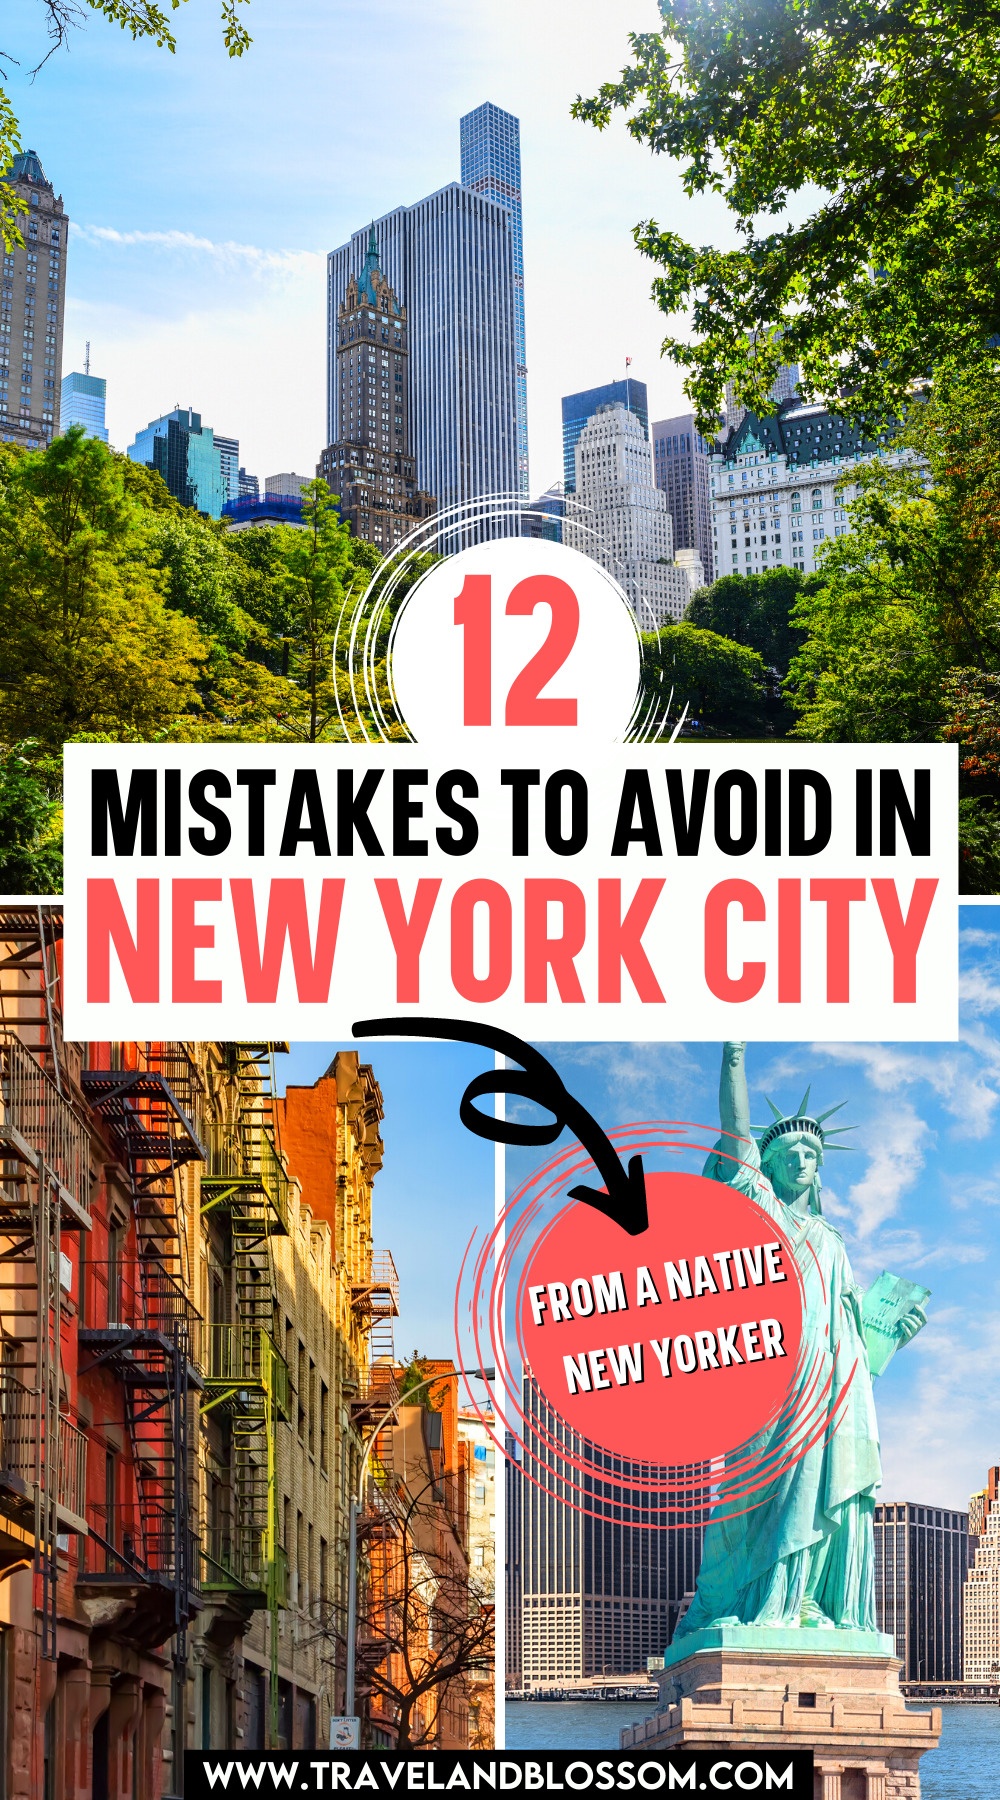 12 Common Mistakes to Avoid in NYC